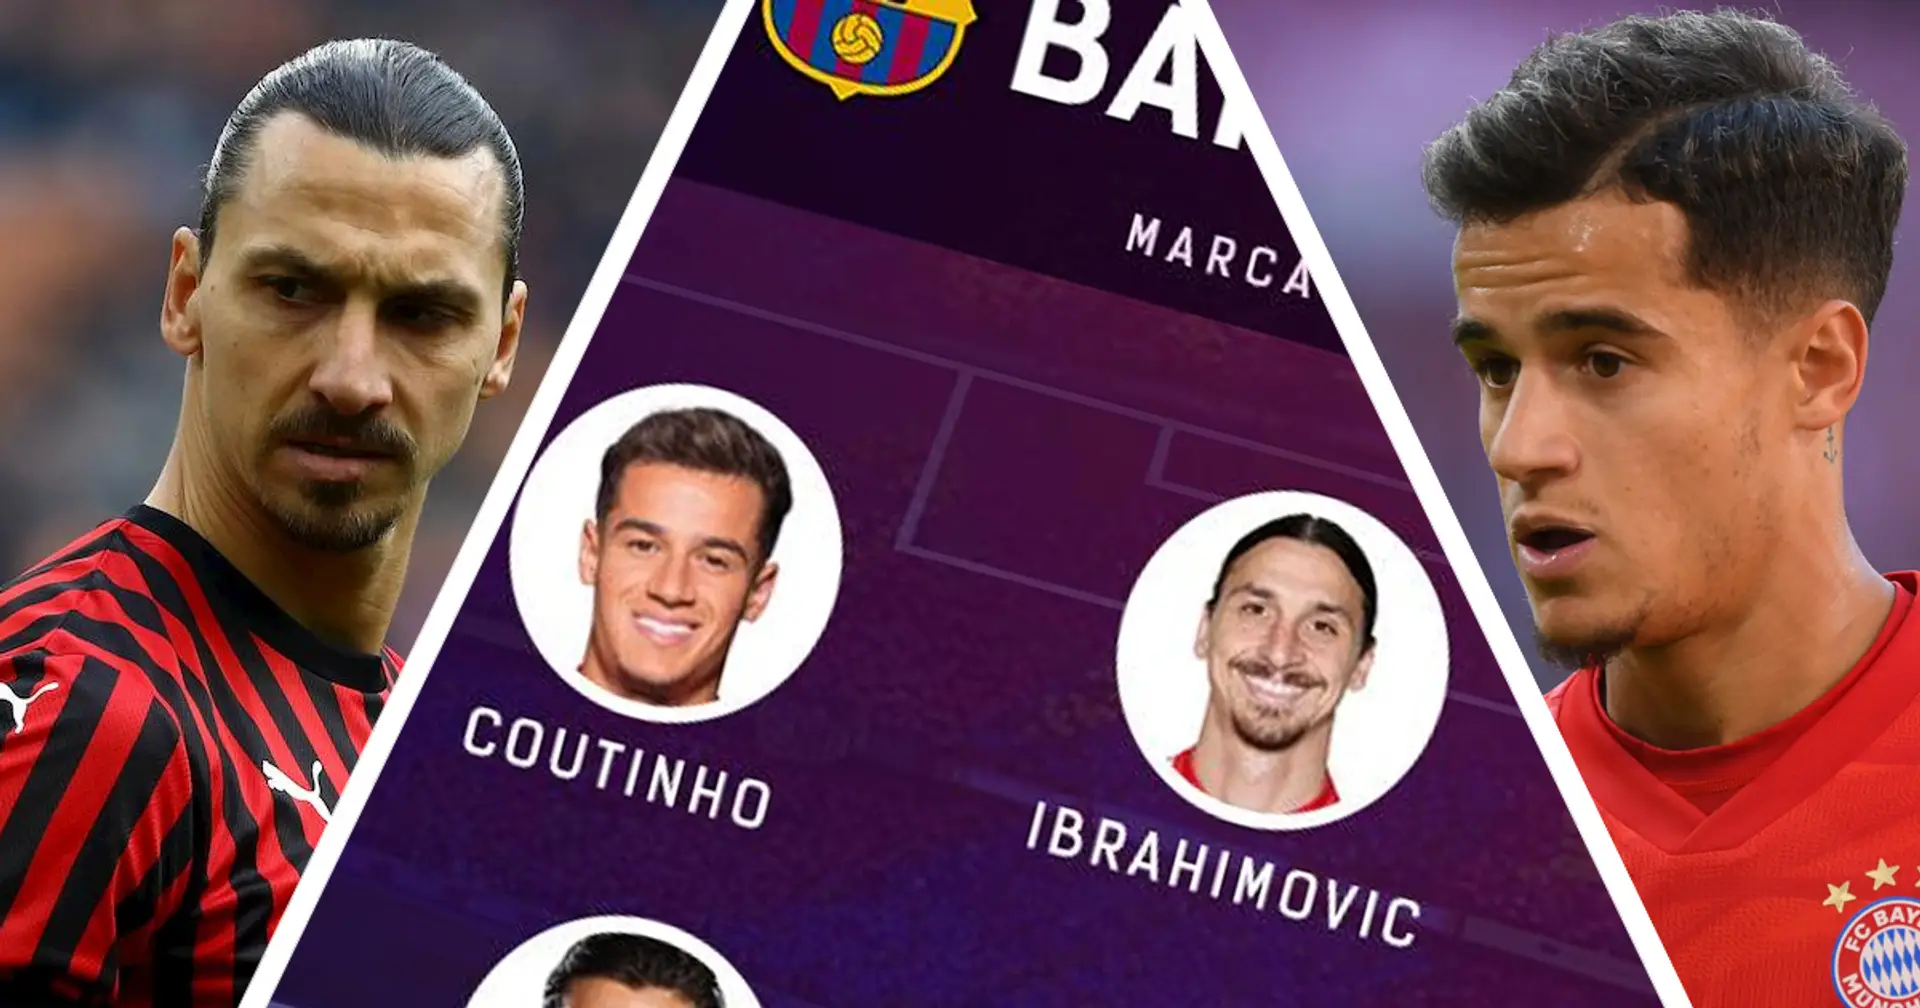 Marca name their Barca's flop XI of 21st century with Coutinho, Ibrahimovic and more